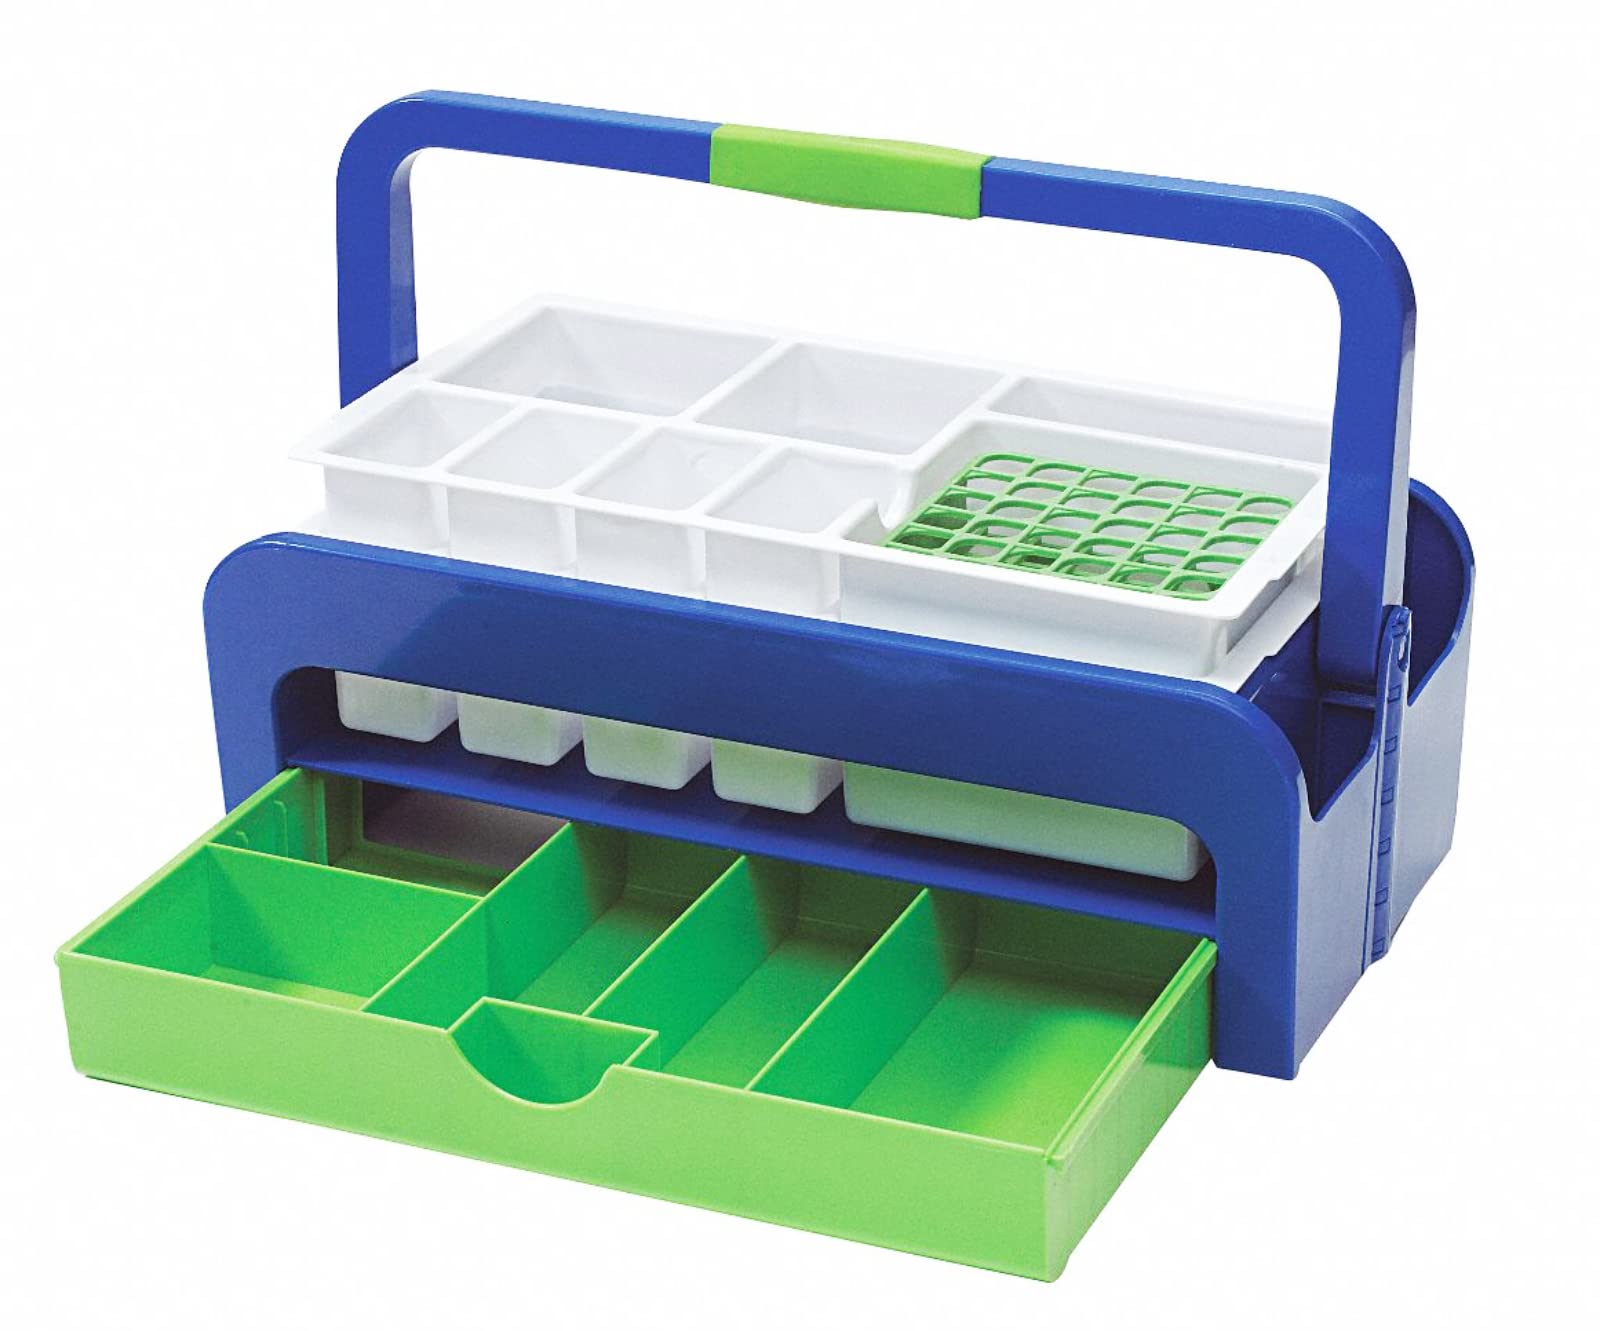 Heathrow Scientific Phlebotomy Tray Tote with Drawer and Folding Handle, Lightweight, Disposable Inserts Included